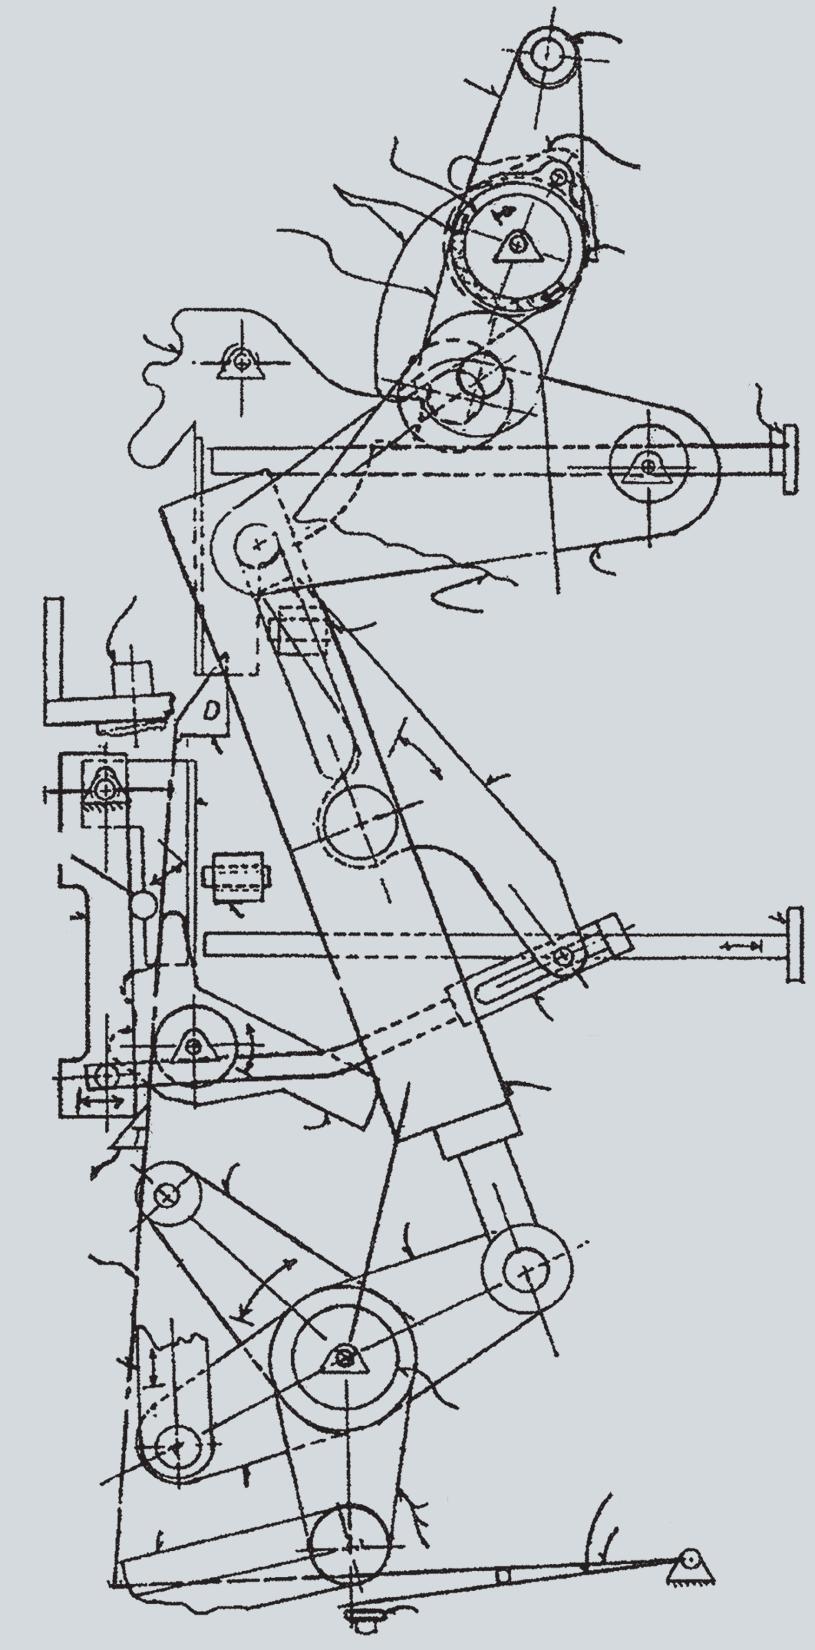 Vacuum interrupter/ operator Figure 17: Operating mechanism section diagram (drawout trip-free linkage shown) mechanism OPEN, closing spring DISCHARGED 64.0* 64.2.1 62.8.3 62.5.2 64.3.1* 62.8.5 64.